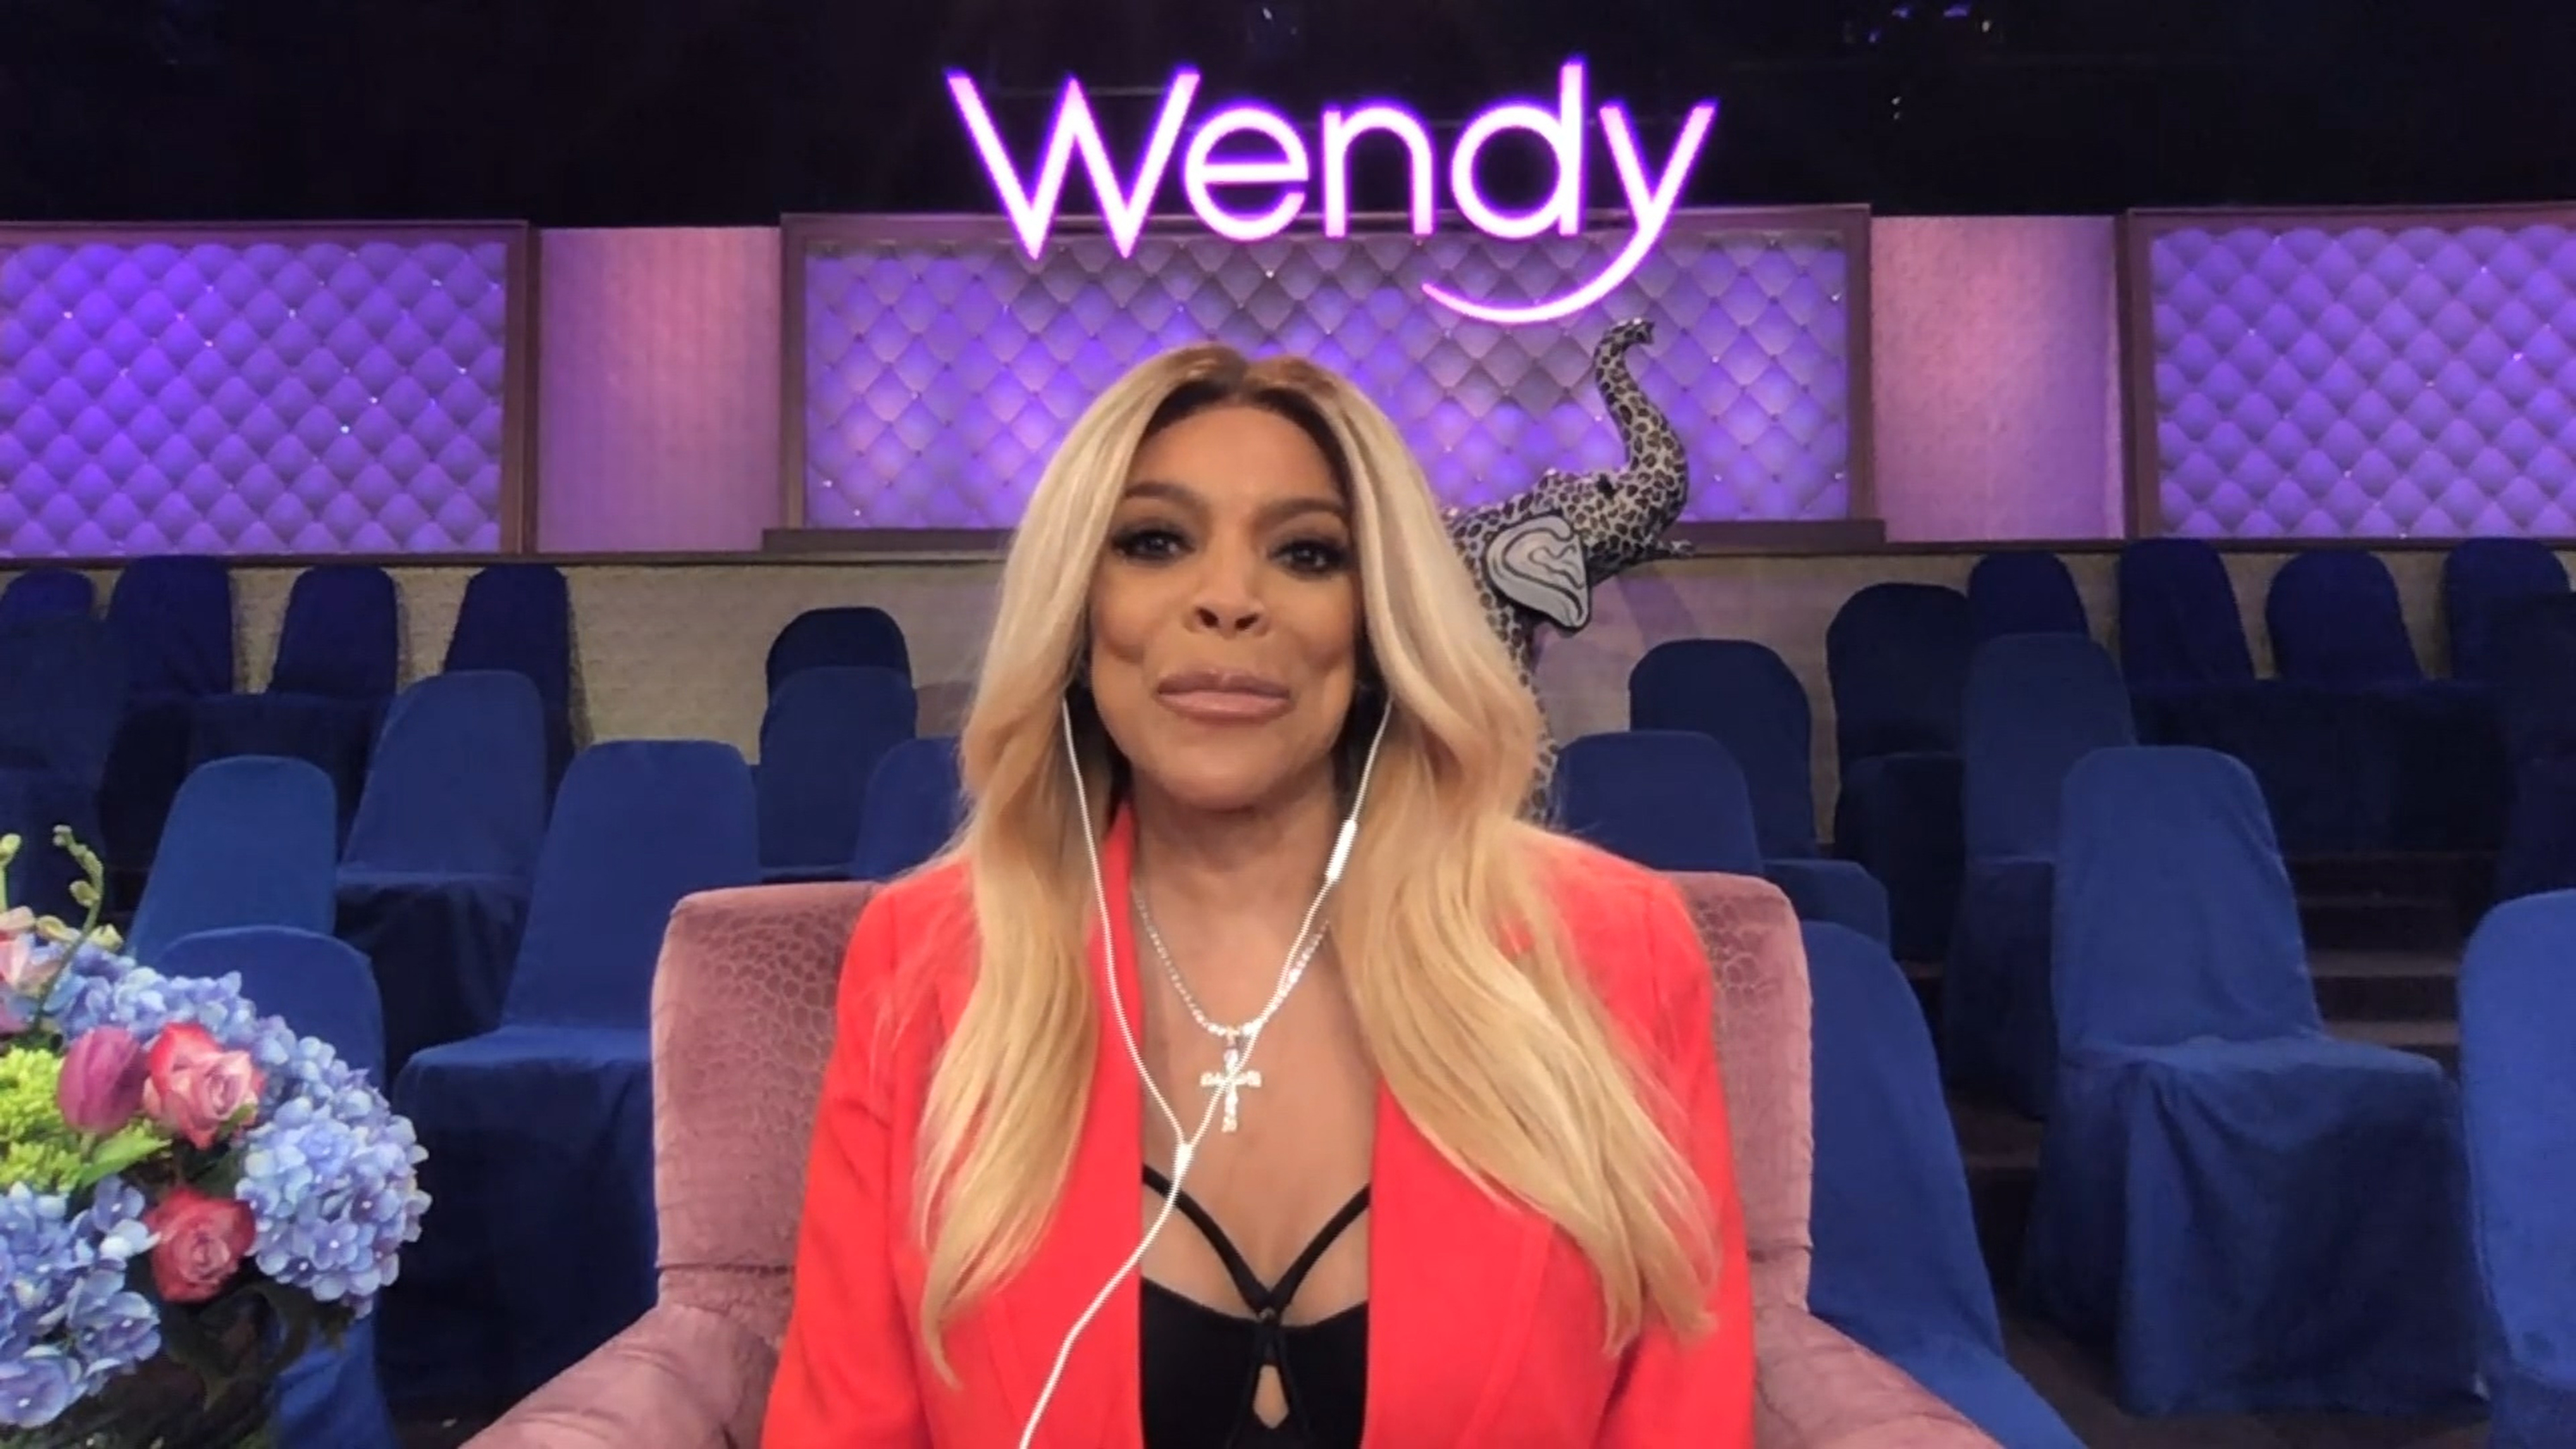 Wendy Williams on "Watch What Happens Live With Andy Cohen" on September 27, 2020. | Source: Getty Images